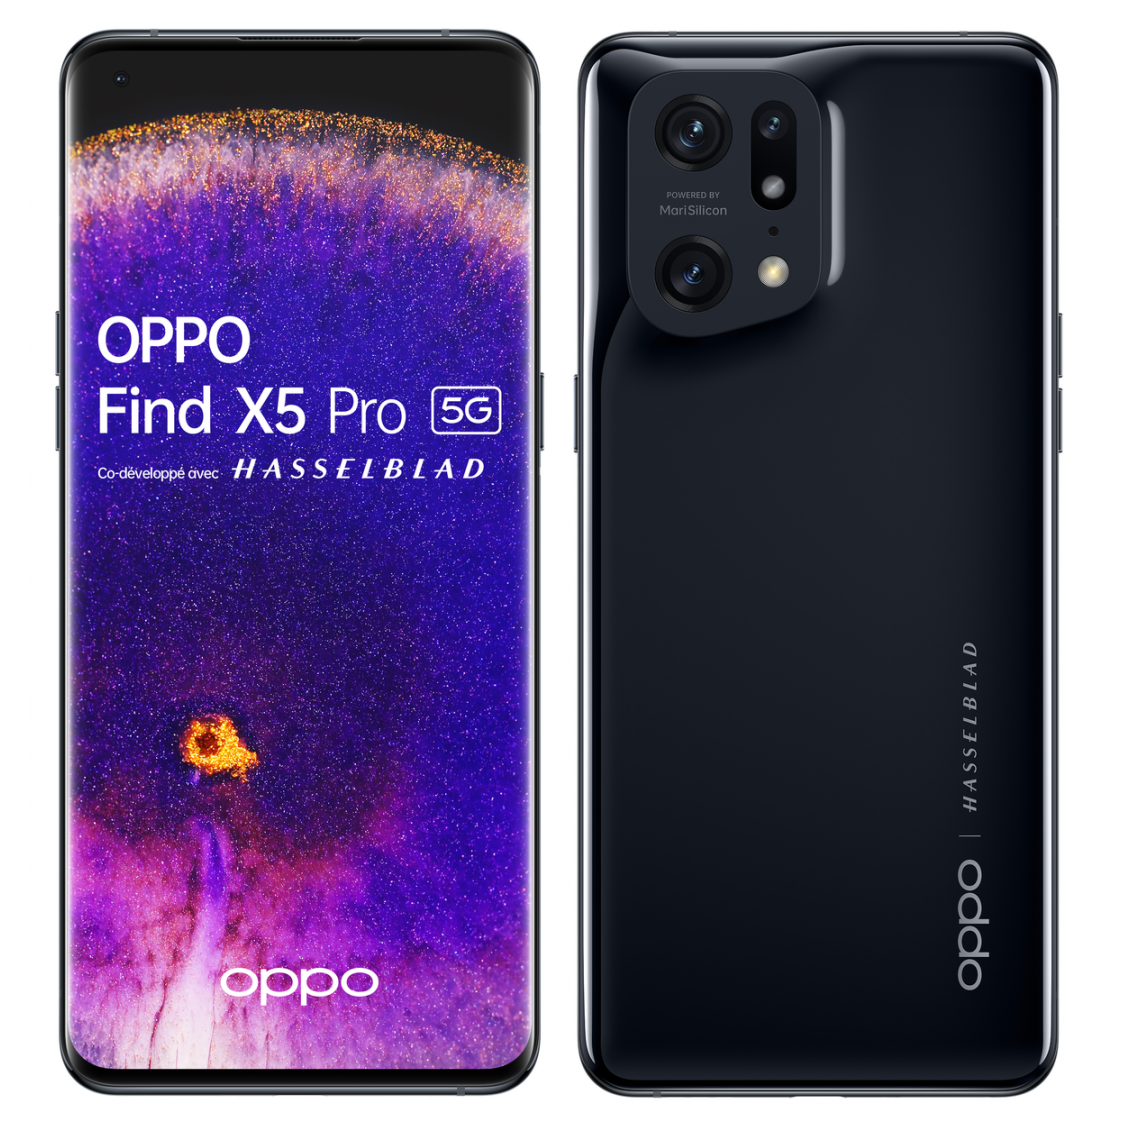 Oppo - FIND X5 Pro - 256 Go - Noir - Smartphone Android